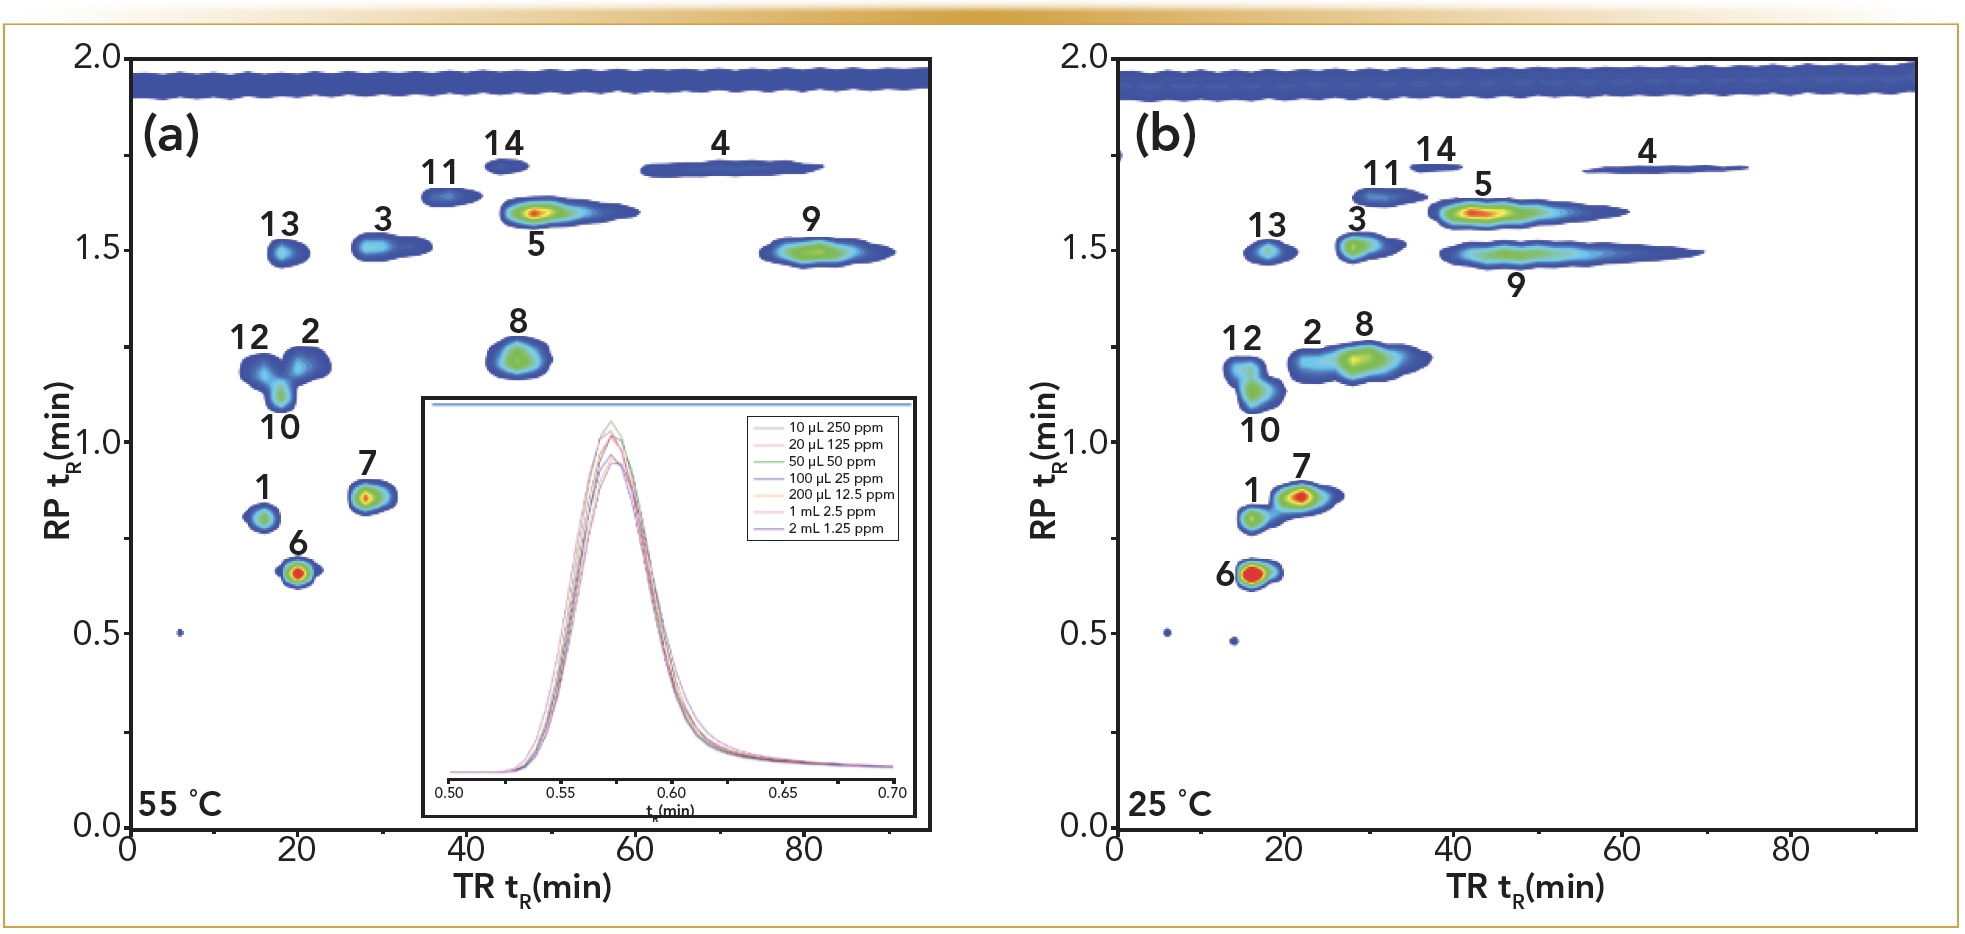 FIGURE 1: Contour plots at 254 nm obtained for the TRLC × RPLC separation of a test mixture, with the 1D TRLC separation operating at (a) 55 °C and (b) 25 °C. Gradient RPLC was performed in 2D. Compound labels: 1. acetophenone; 2. propriophenone; 3. butyrophenone; 4. hexanophenone; 5. benzophenone; 6. methylparaben; 7. ethylparaben; 8. propylparaben; 9. butylparaben; 10. propylbenzoate; 11. butylbenzoate; 12. methoxybenzene; 13. ethoxybenzene; 14. butoxybenzene (2). Peak profiles of increasing volumes of methylparaben transferred to the second dimension column. See text for details.